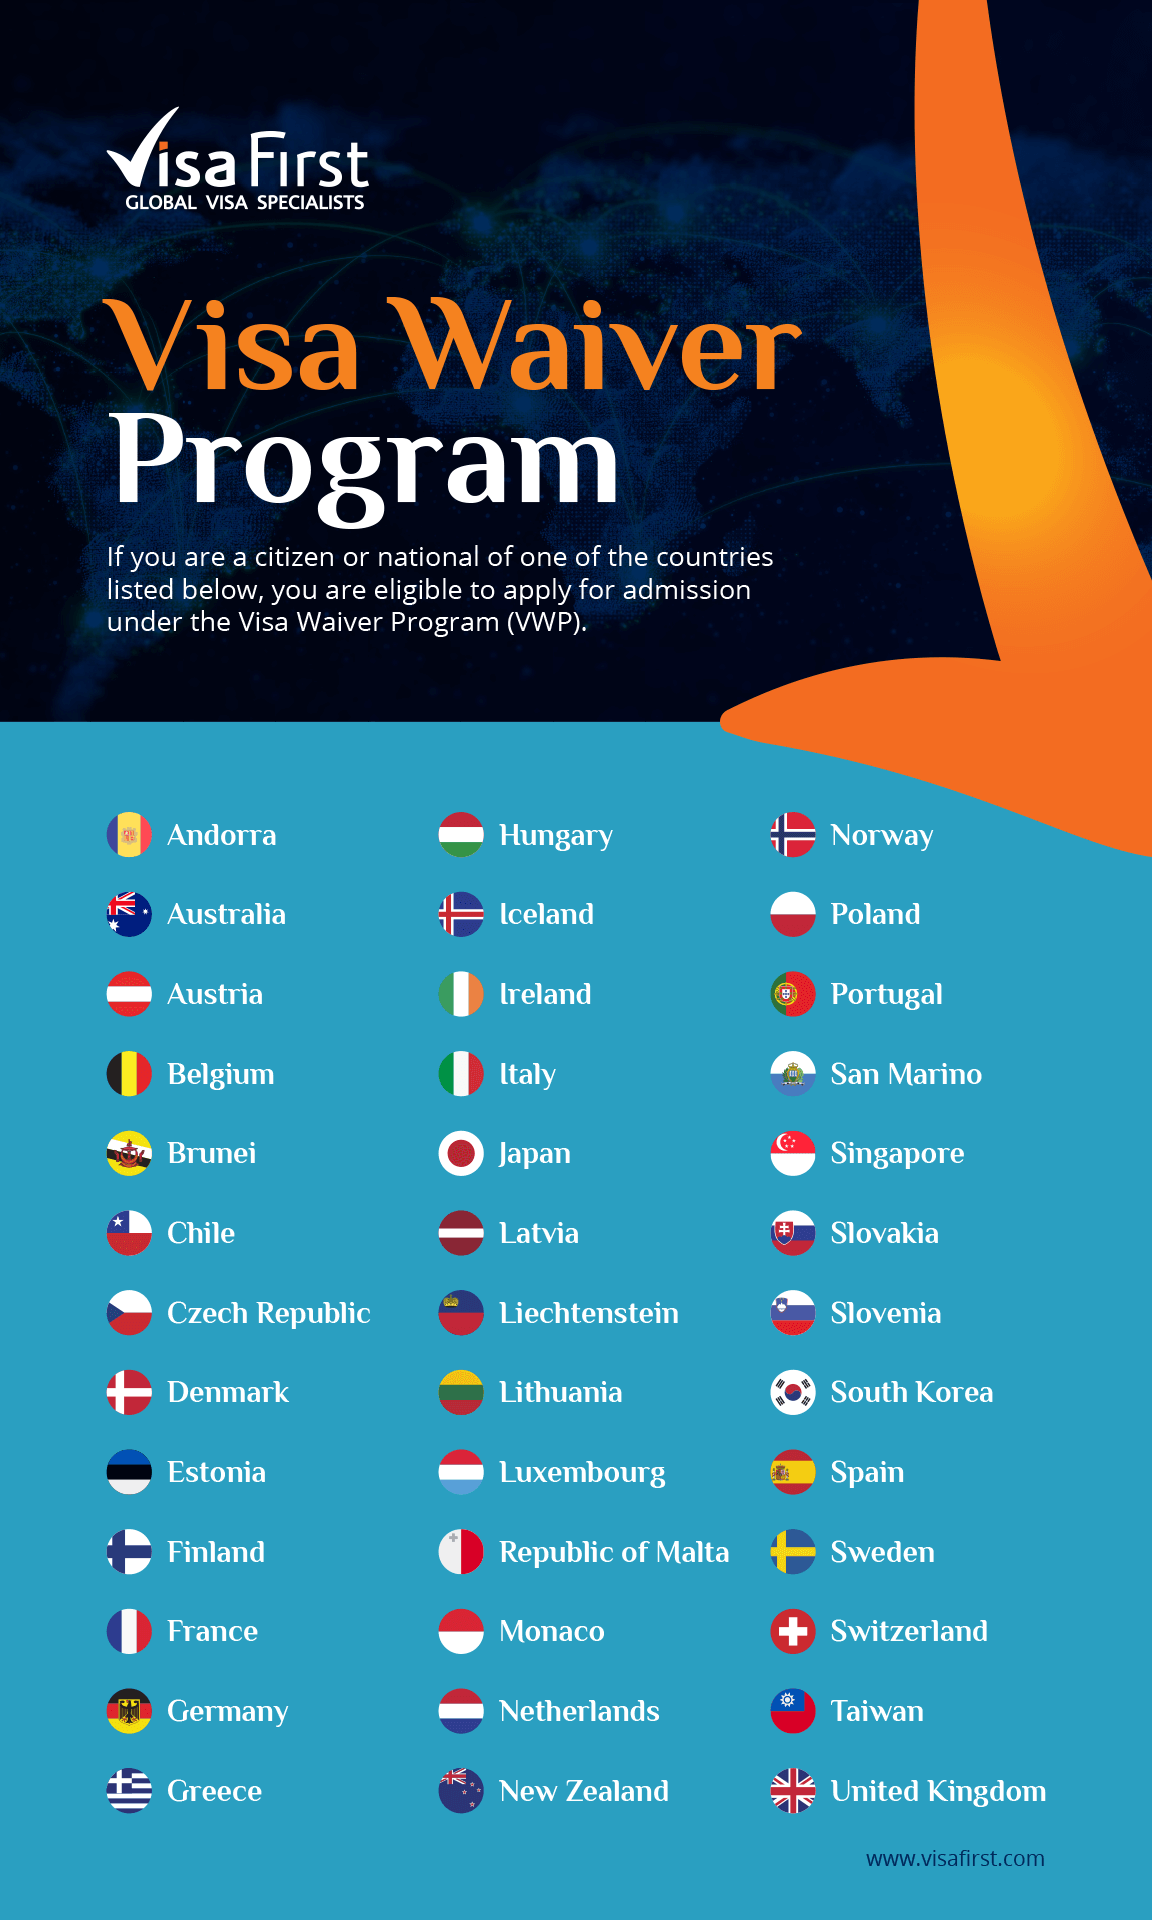 List of eligible countries for the Visa Waiver Program